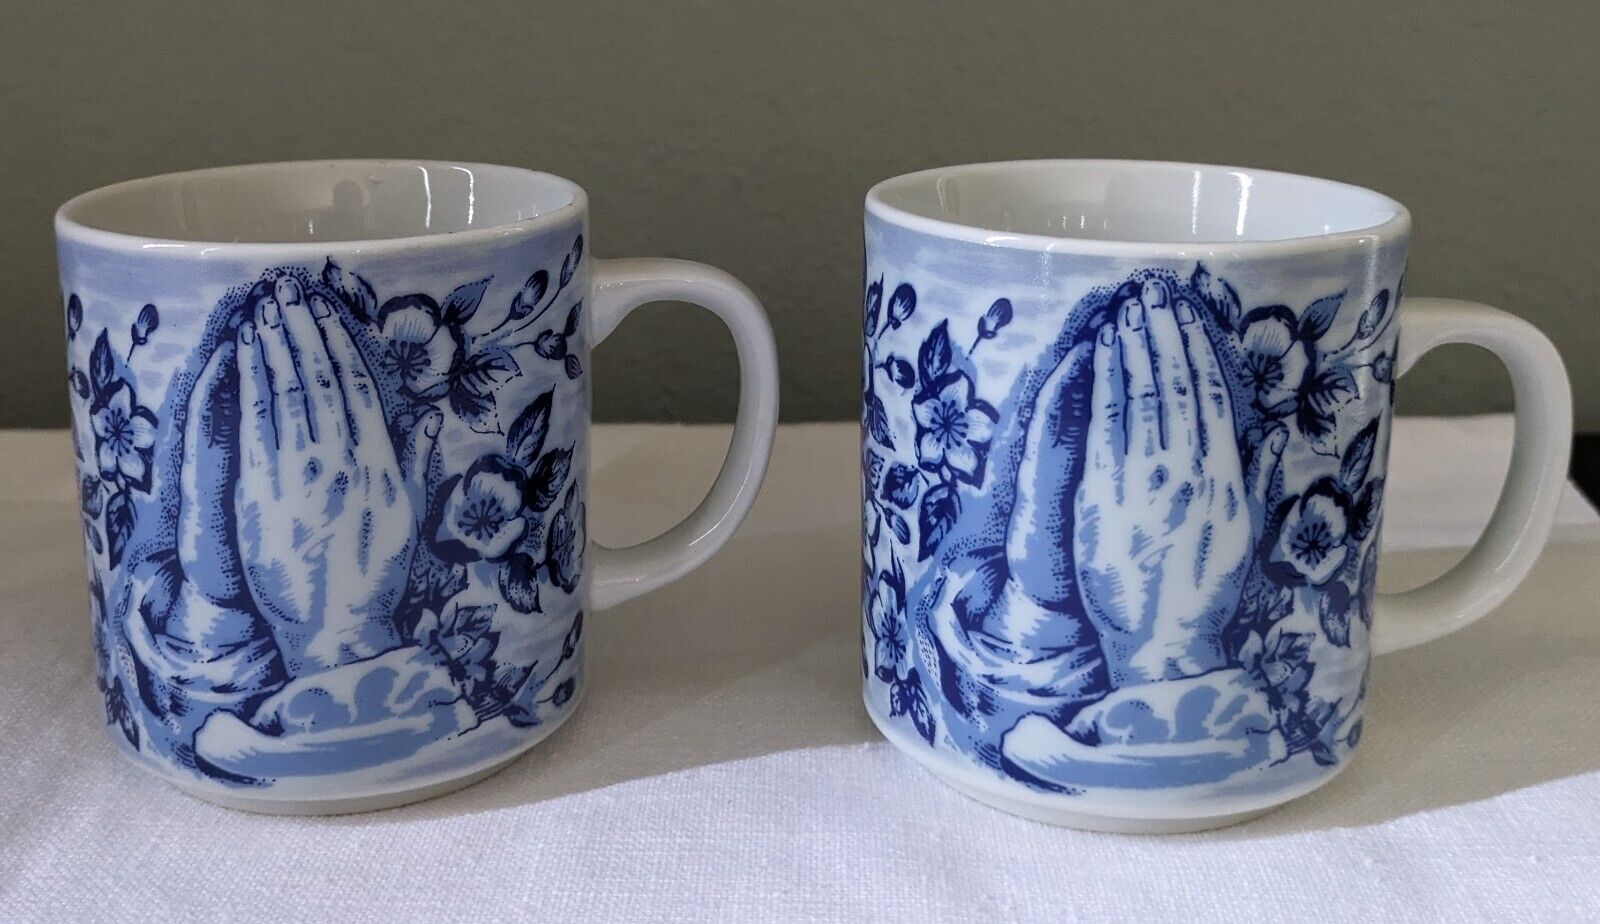 Vintage Praying Hands White and Blue Mugs / Coffee Cups Lugene’s Japan X2